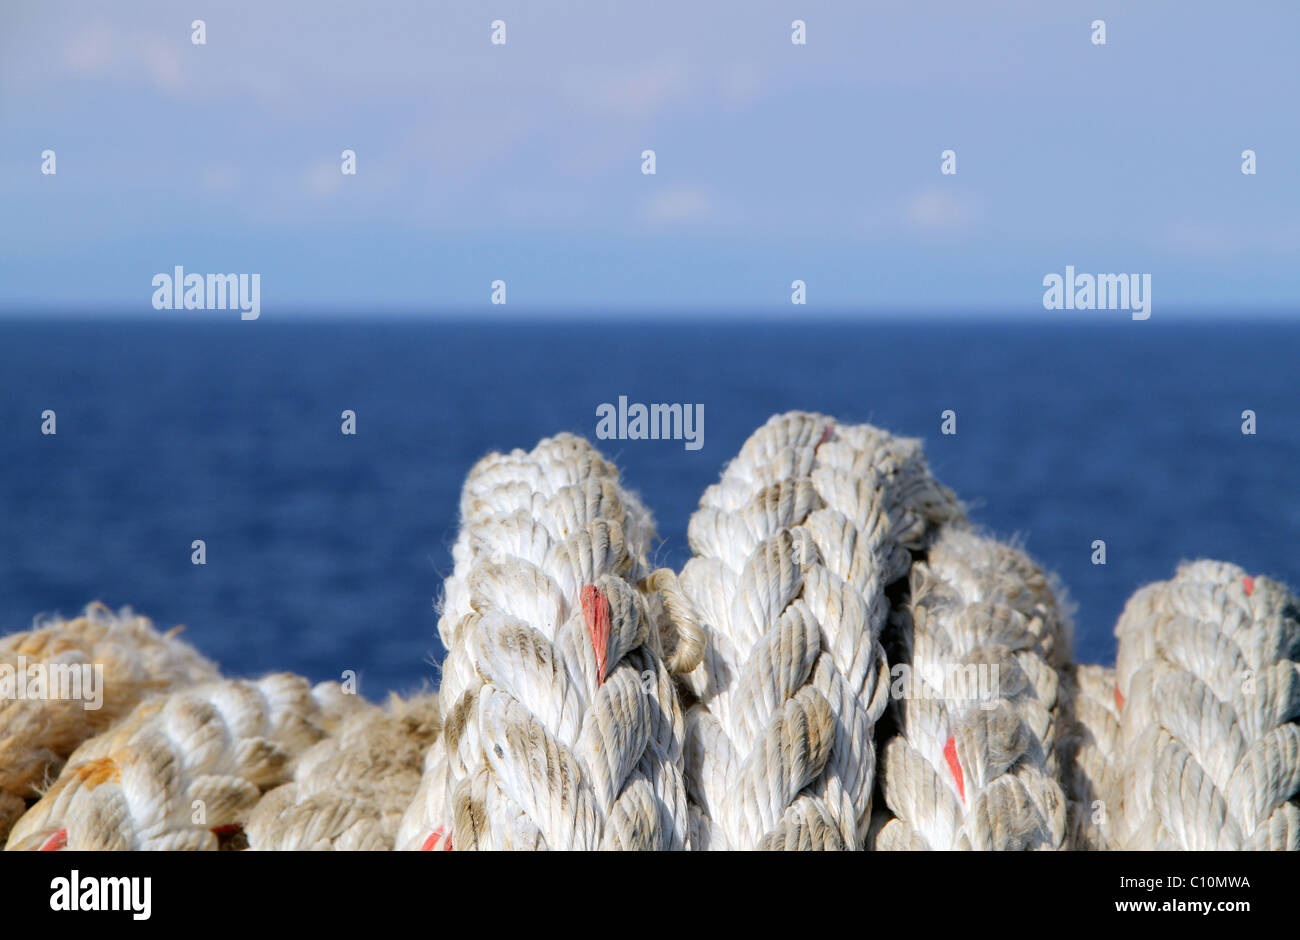 Rope on the edge of a ship Stock Photo